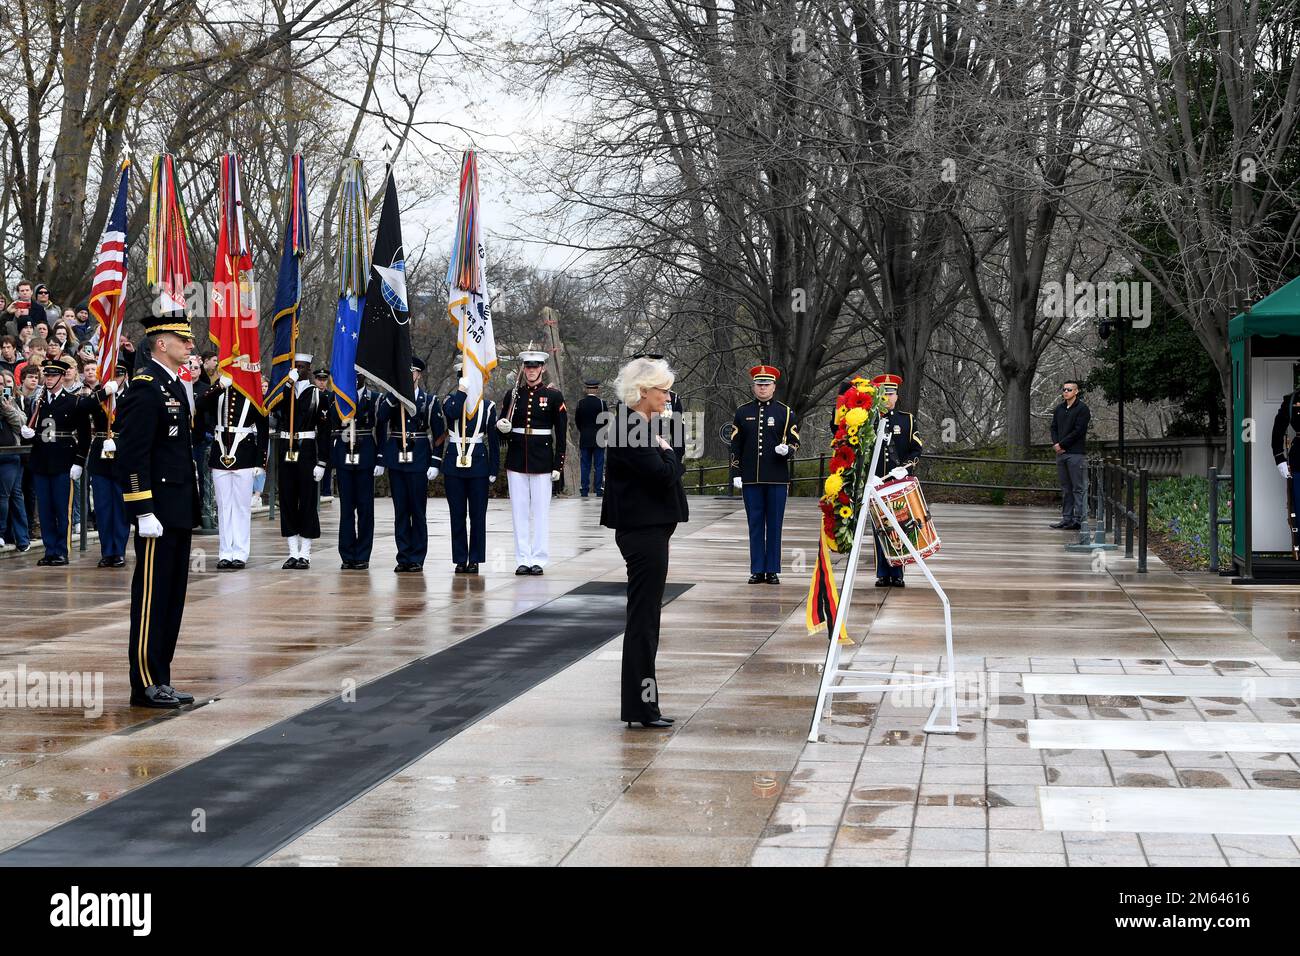 Germany's Federal Minister of Defense, Christine Lambrecht, lays a wreath at the Tomb of the Unknown Soldier at Arlington National Cemetery, Arlington, Va., March 30, 2022. This event was hosted by Maj. Gen. Allan M. Pepin, commanding general, Joint Task Force-National Capital Region/U.S. Army Military District of Washington. Stock Photo